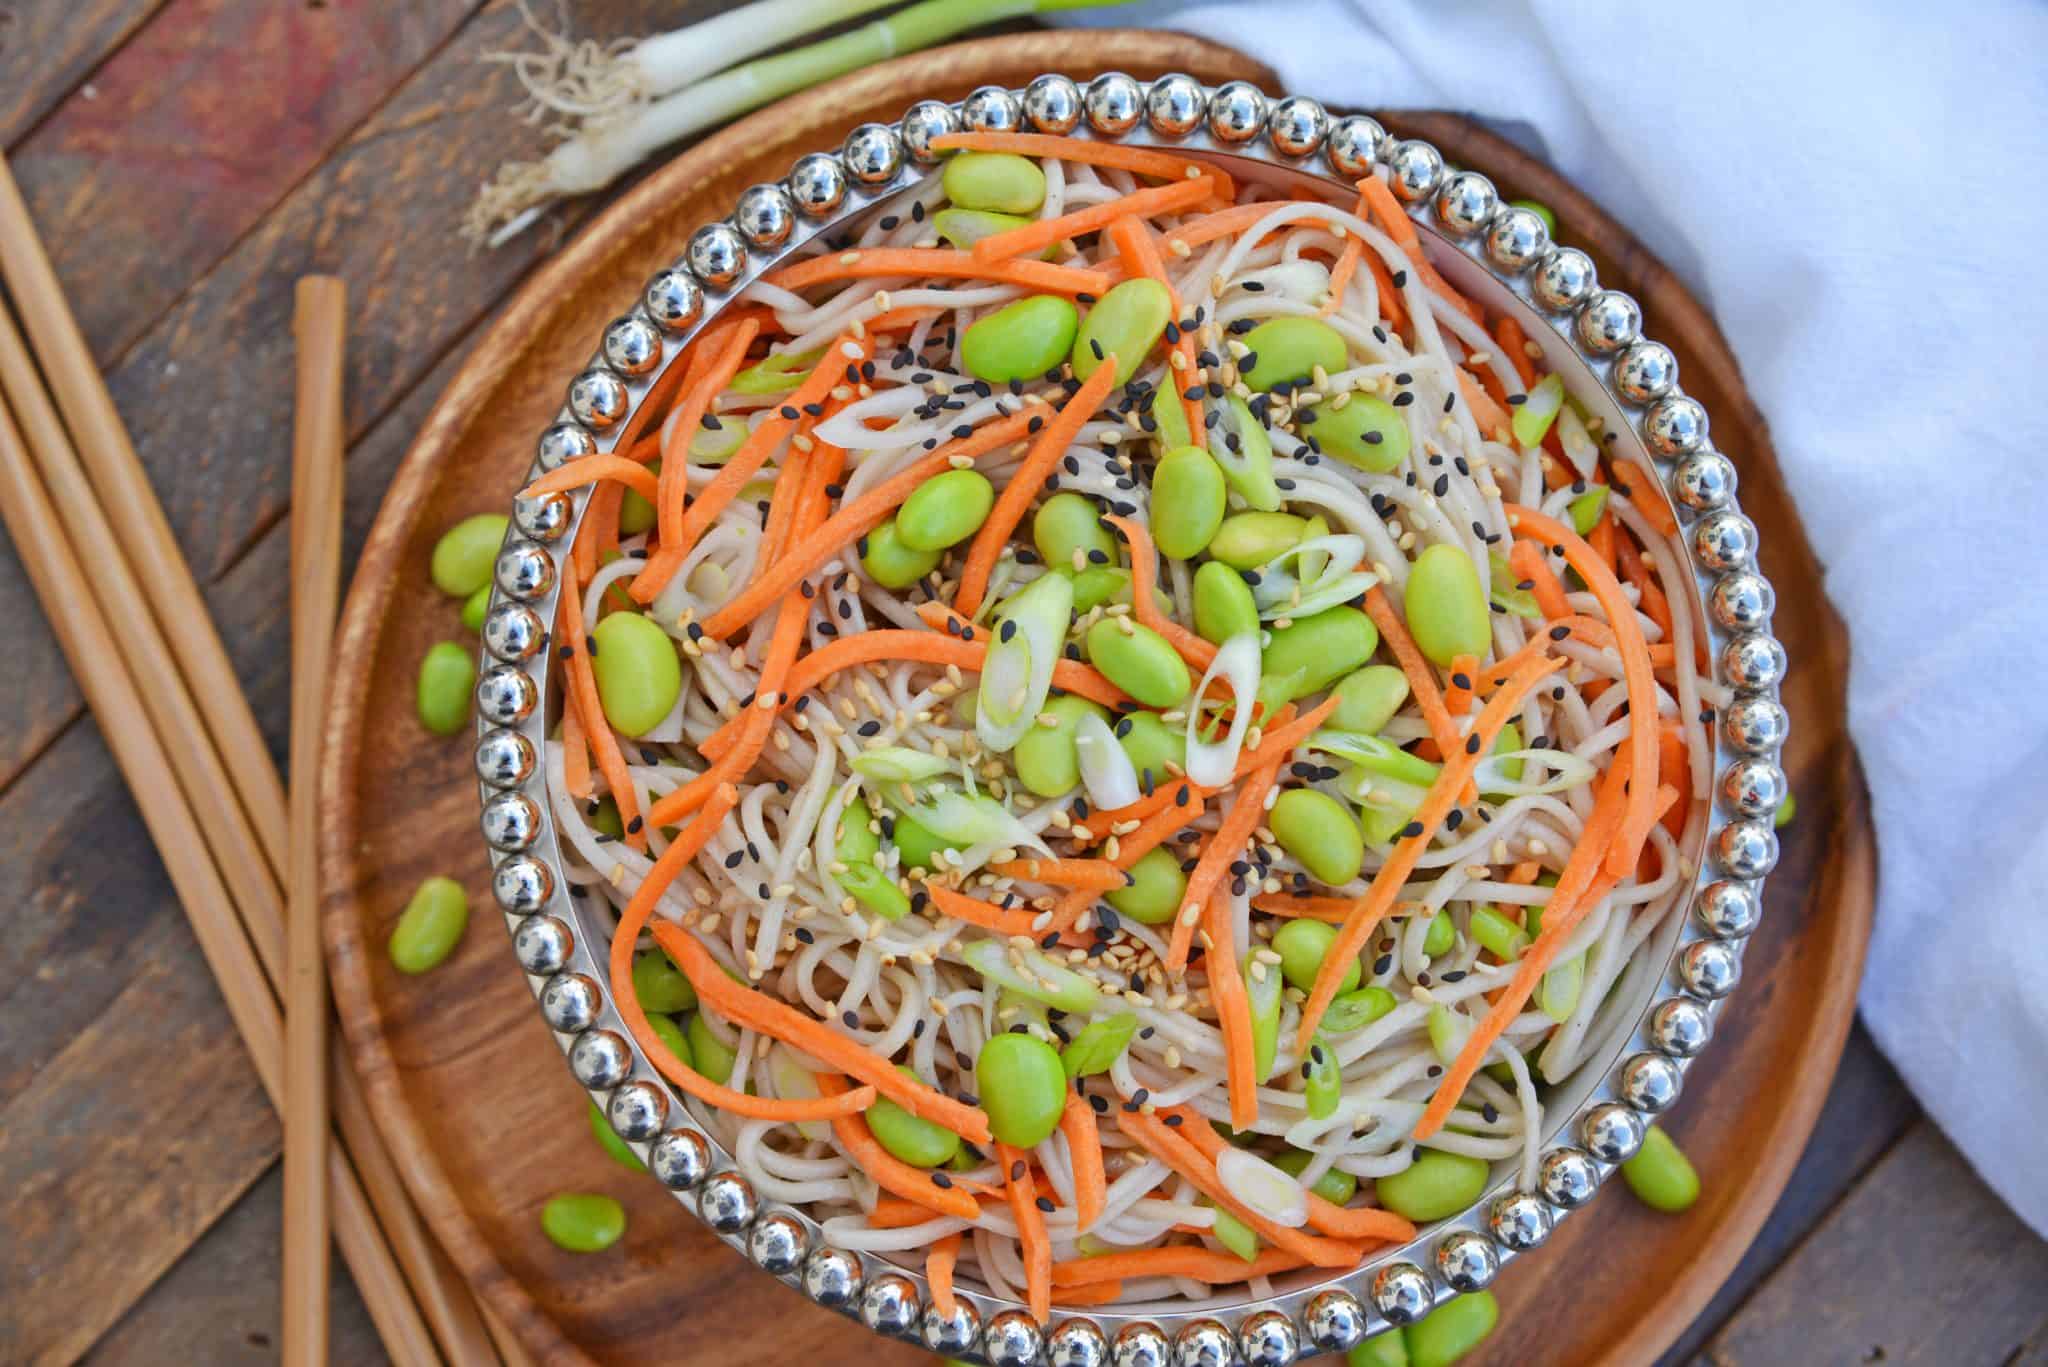 Sesame Soba Noodles are made from delicious buckwheat noodles tossed in a light Asian sauce, edamame, and carrots! This noodle salad is full of yummy flavors! #sobanoodlerecipe #whataresobanoodles? www.savoryexperiments.com